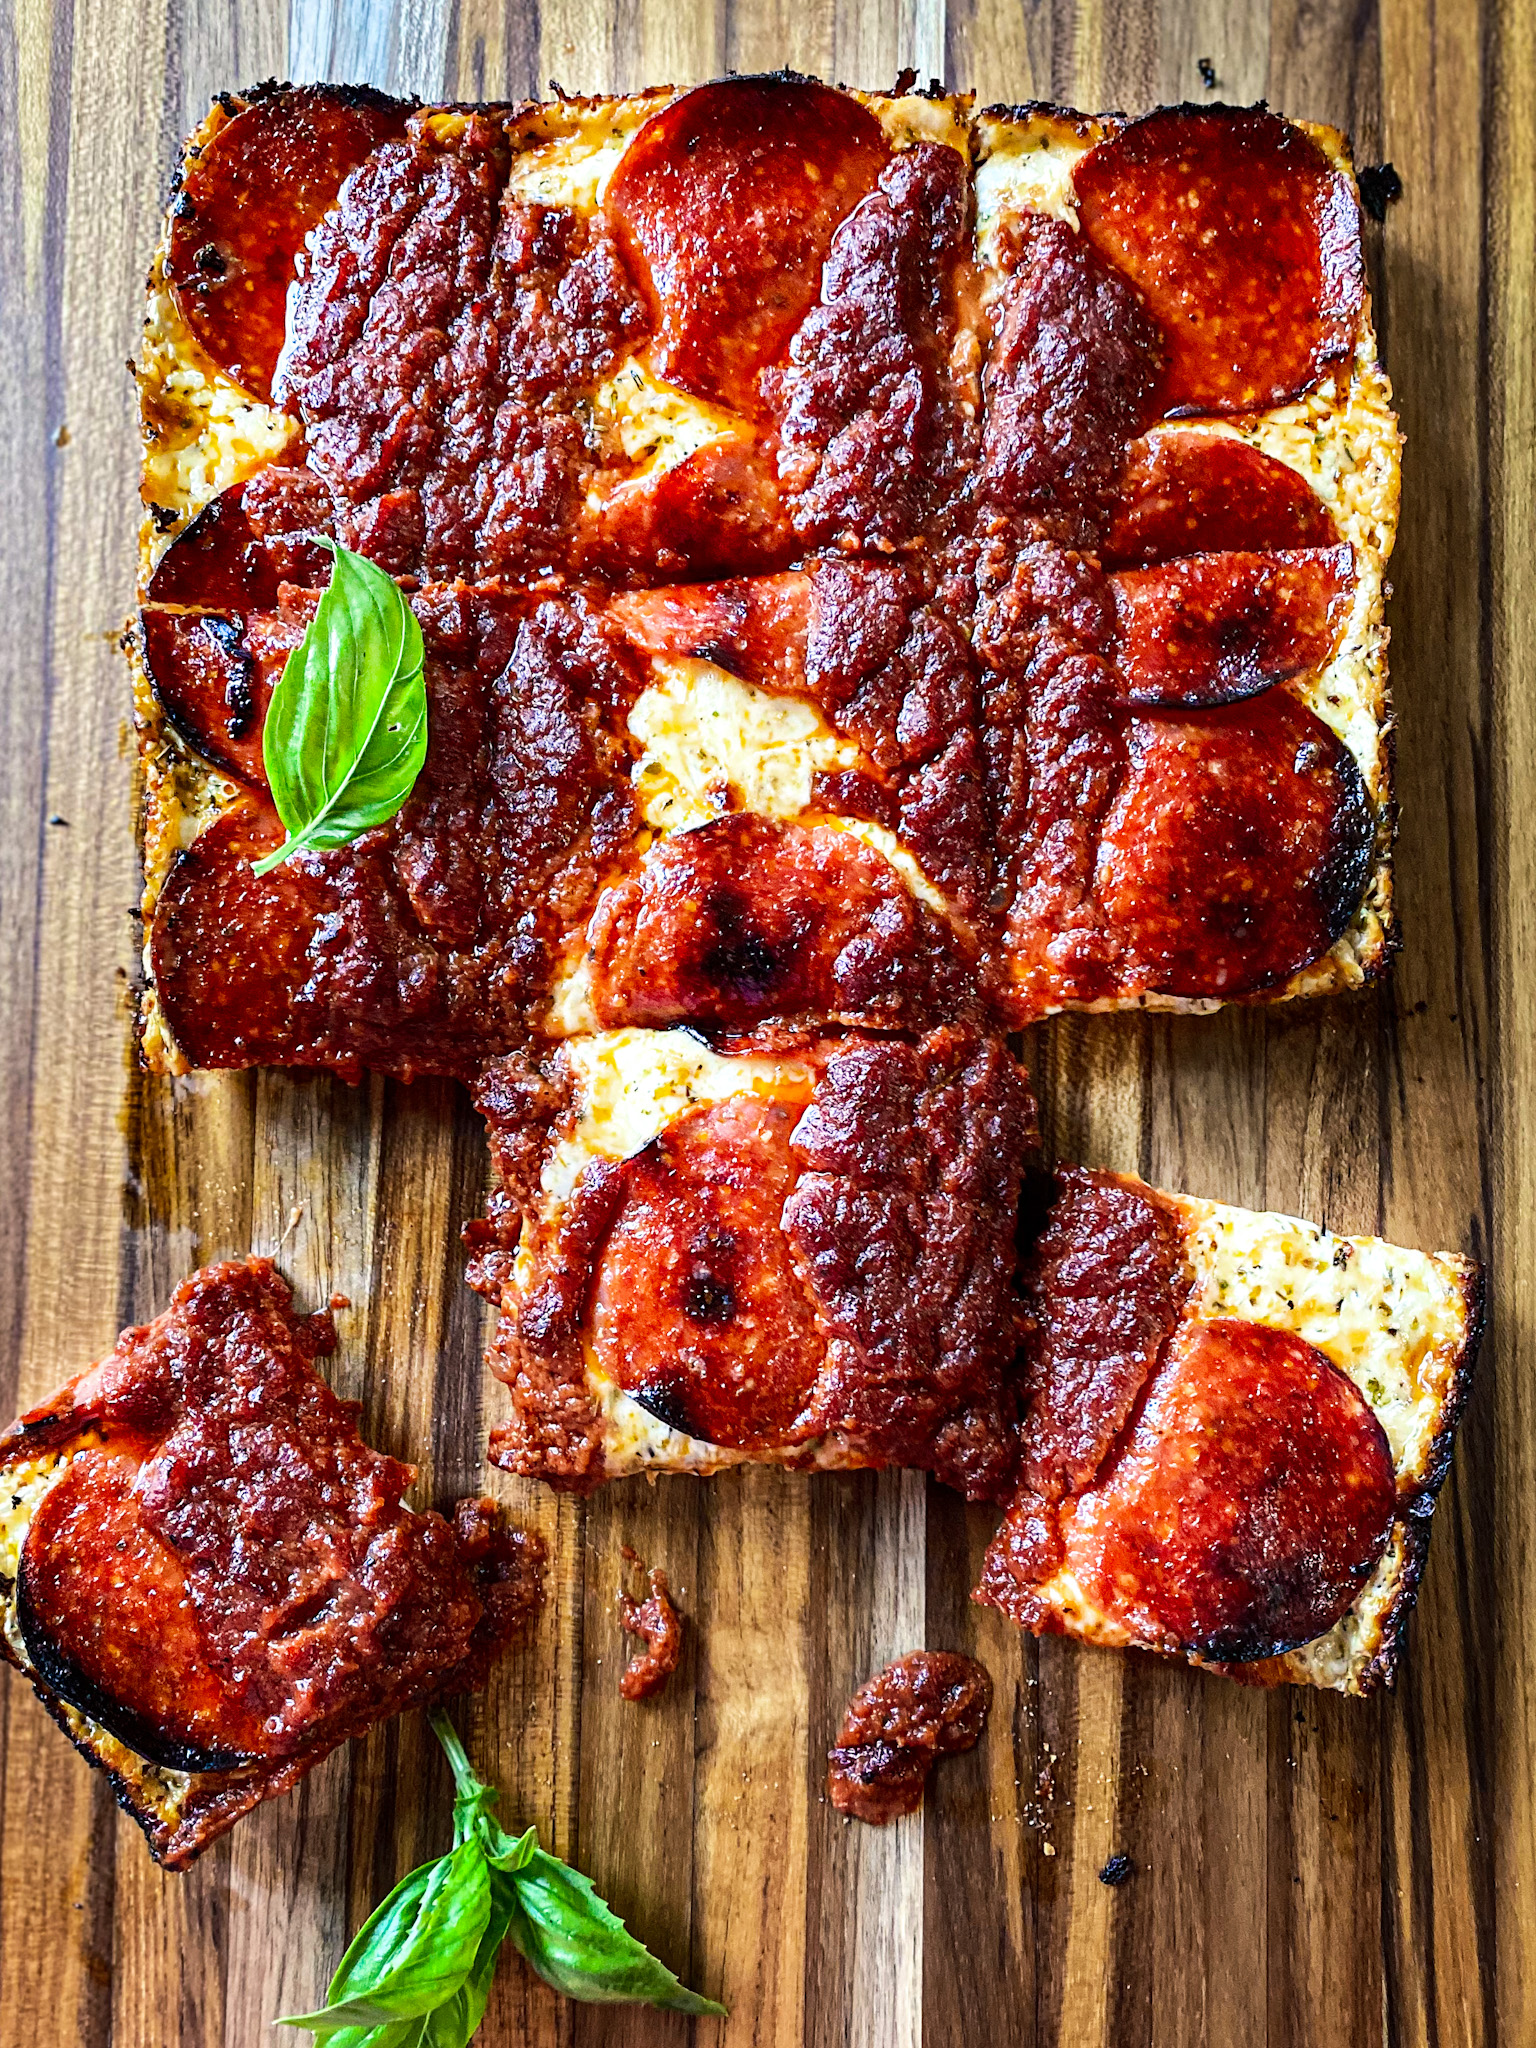 Detroit pepperoni pizza on a cutting board with basil